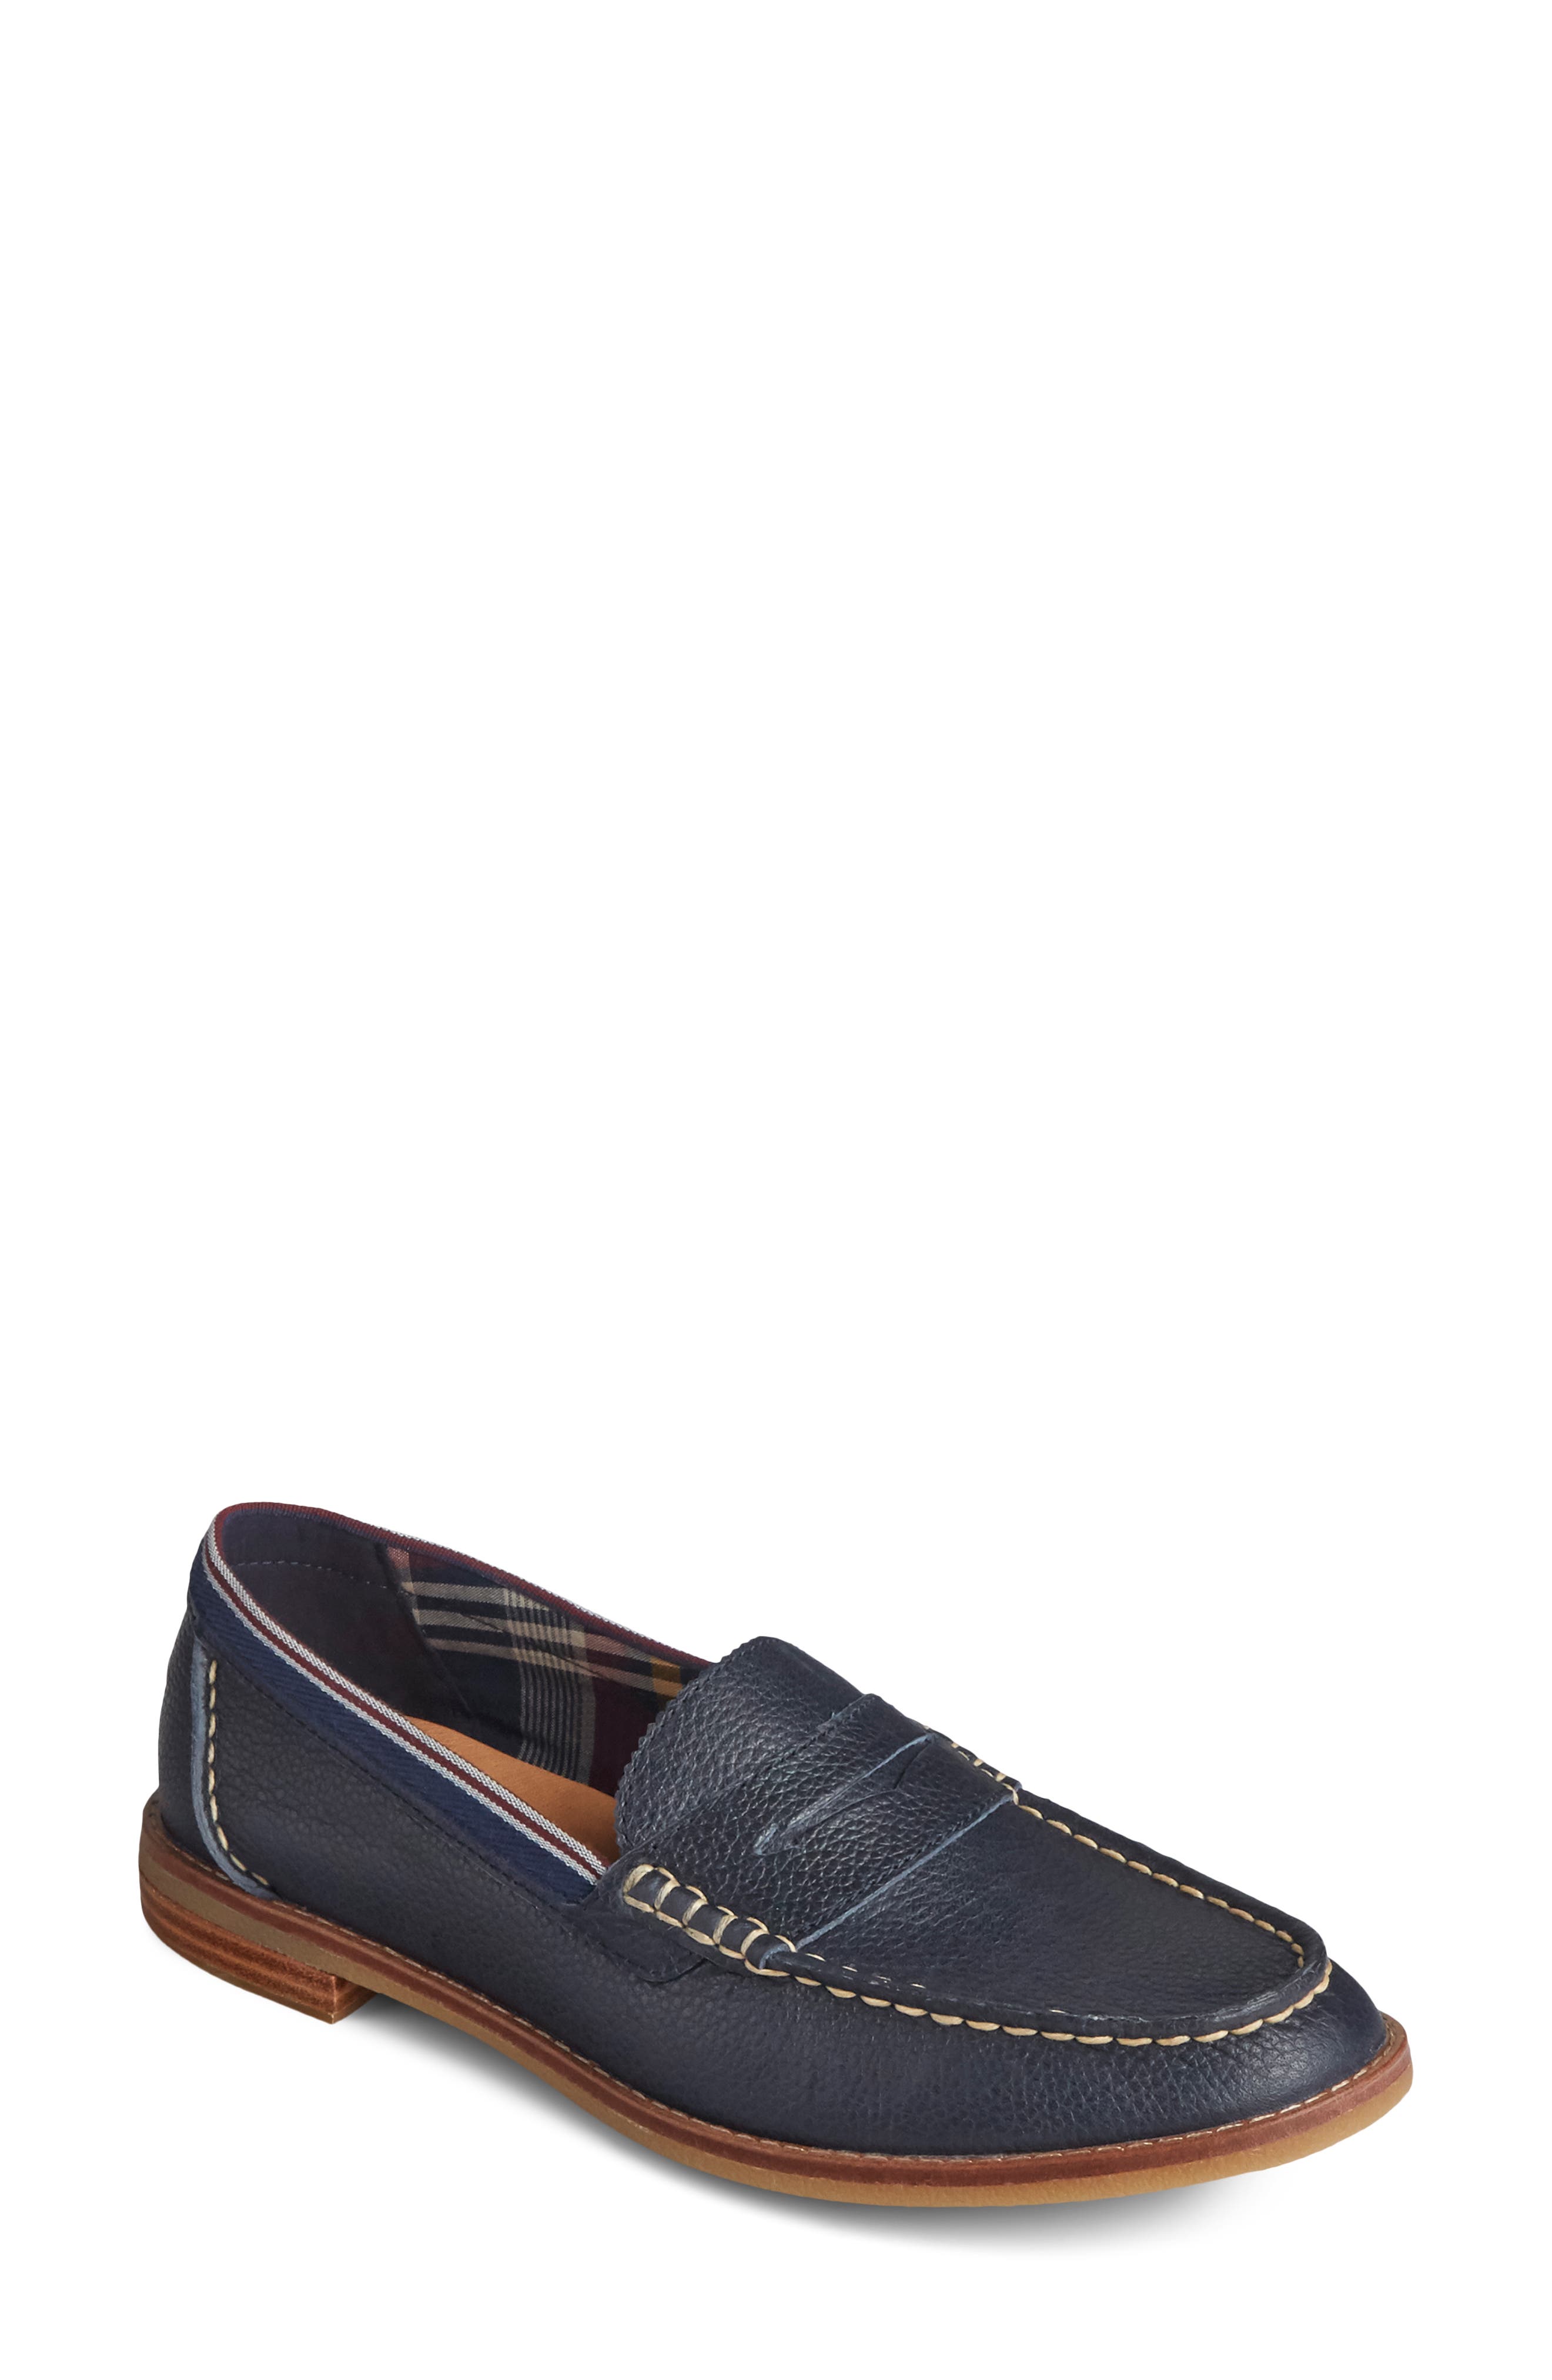 Sperry Seaport Penny Loafer In Navy Tumbled Leather | ModeSens